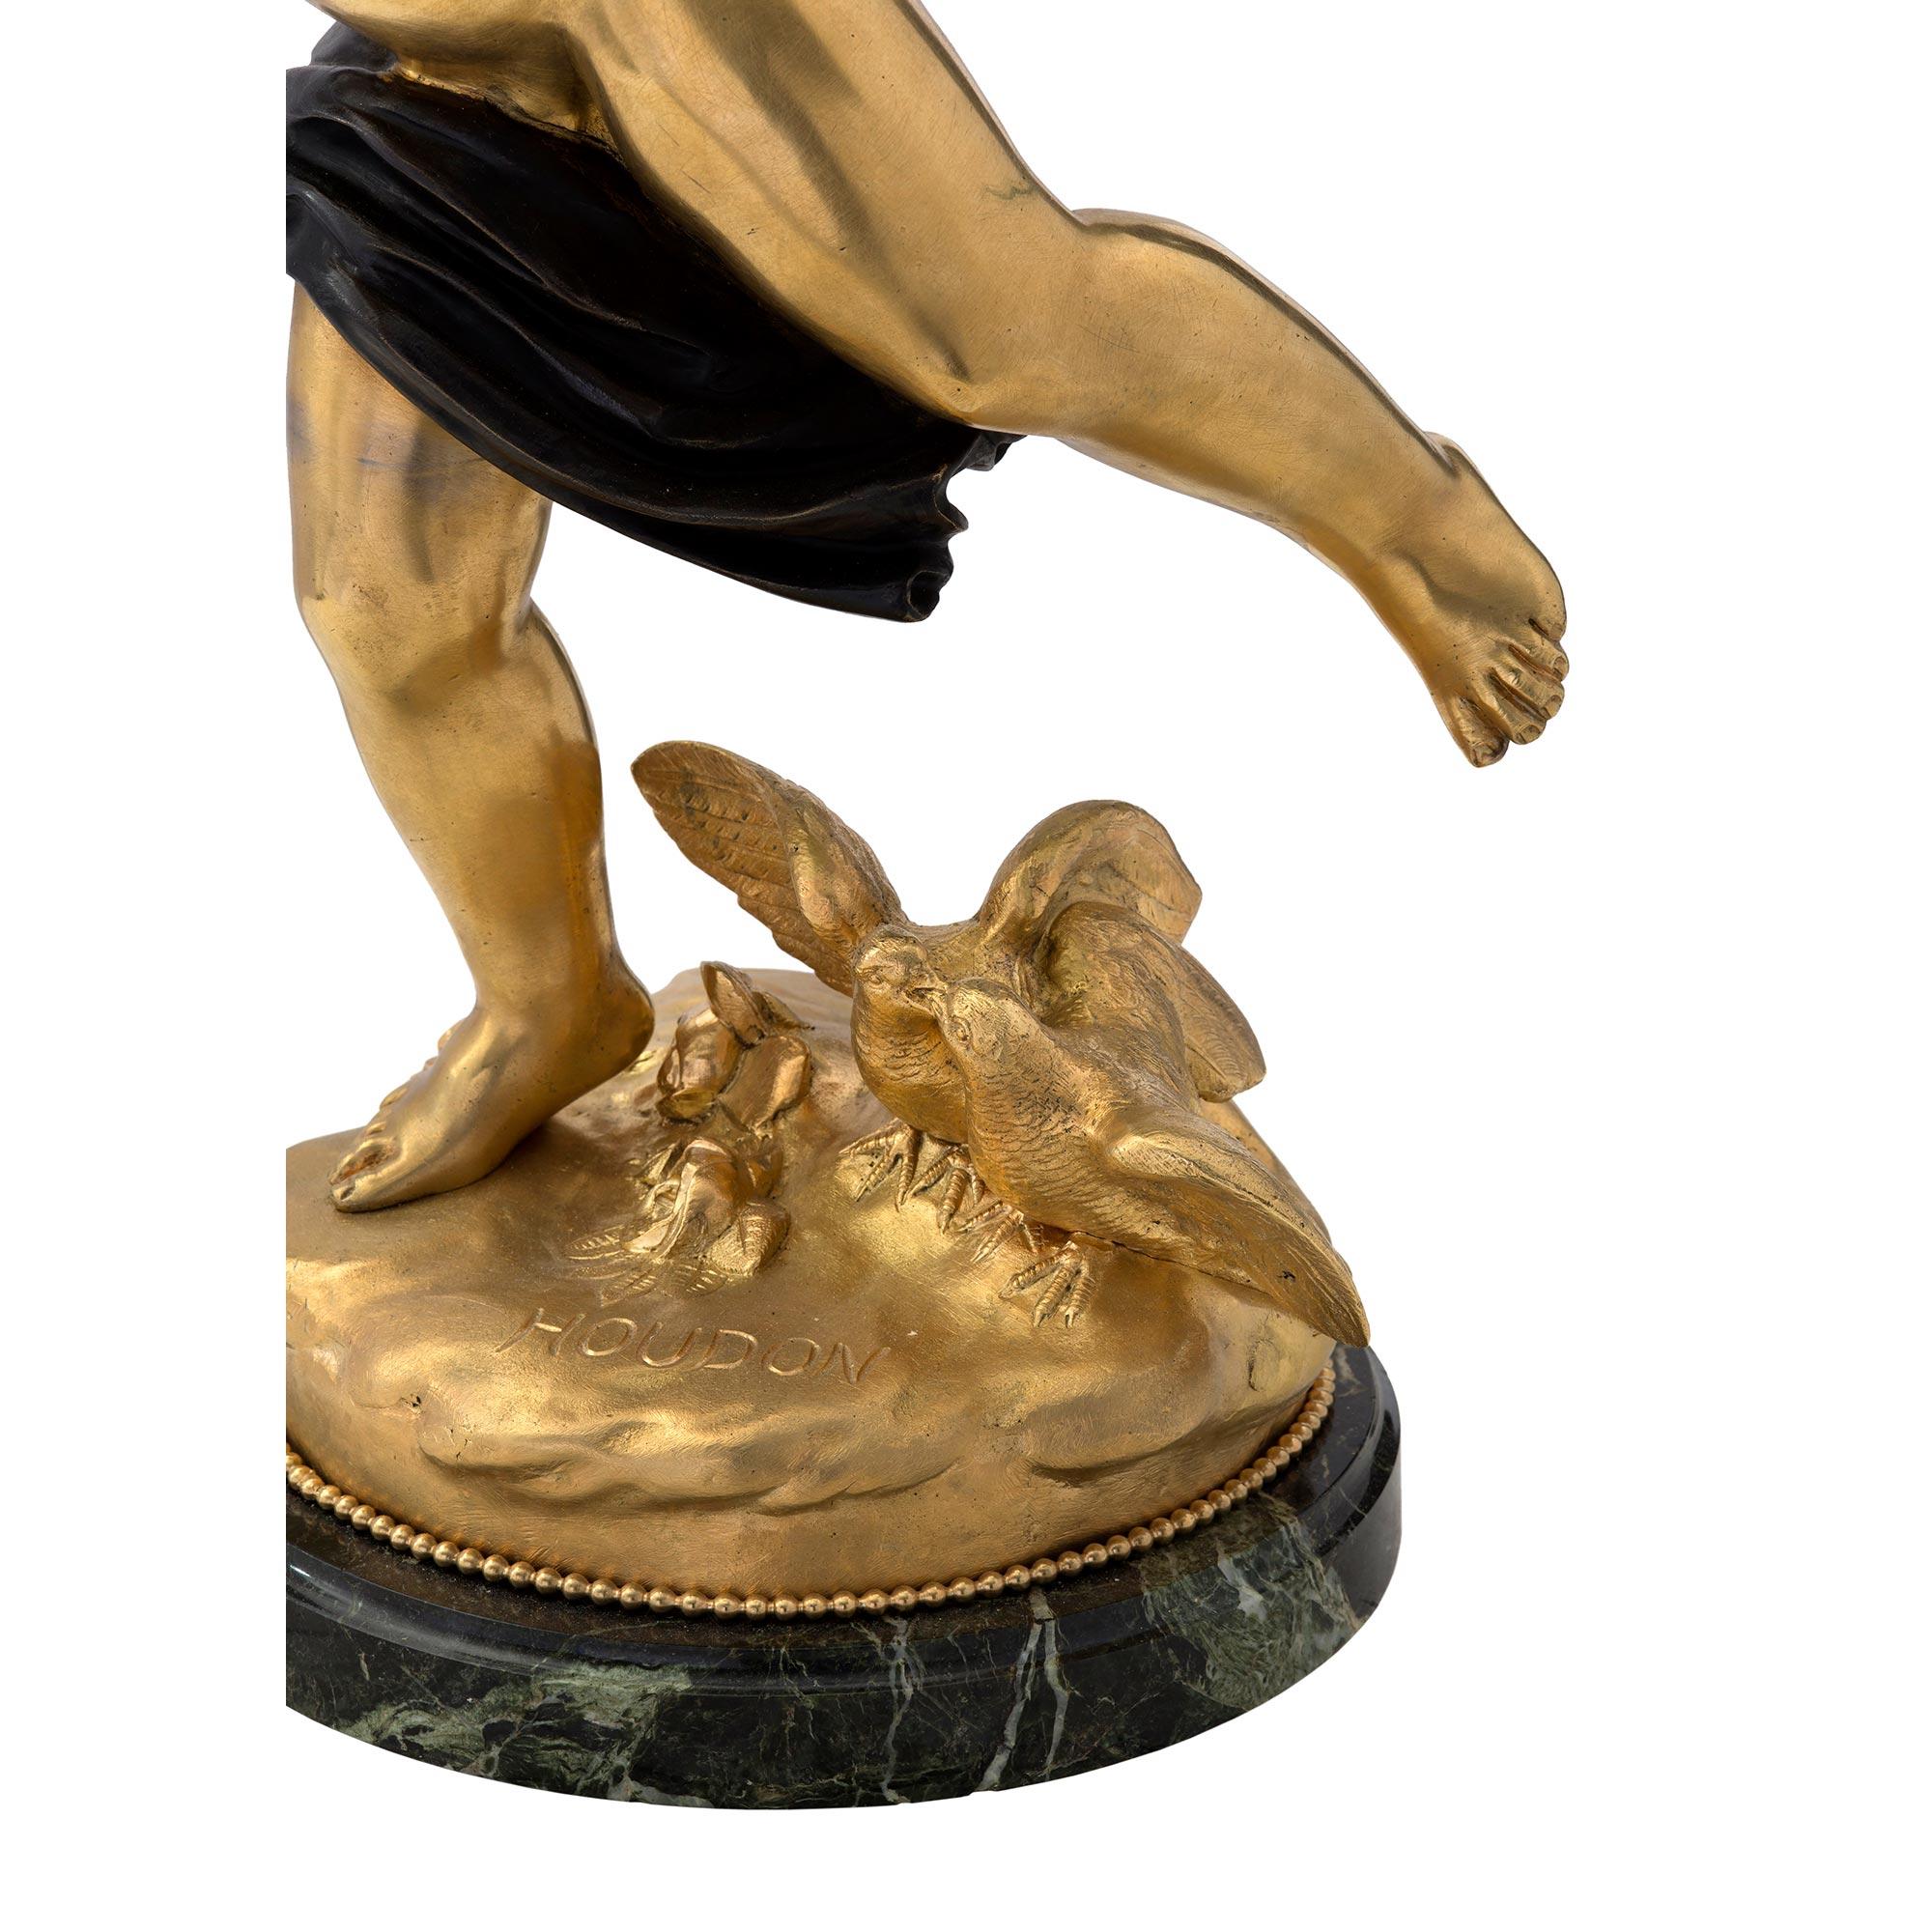 French 19th Century Ormolu, Patinated Bronze and Marble Statue, Signed Houdon For Sale 2